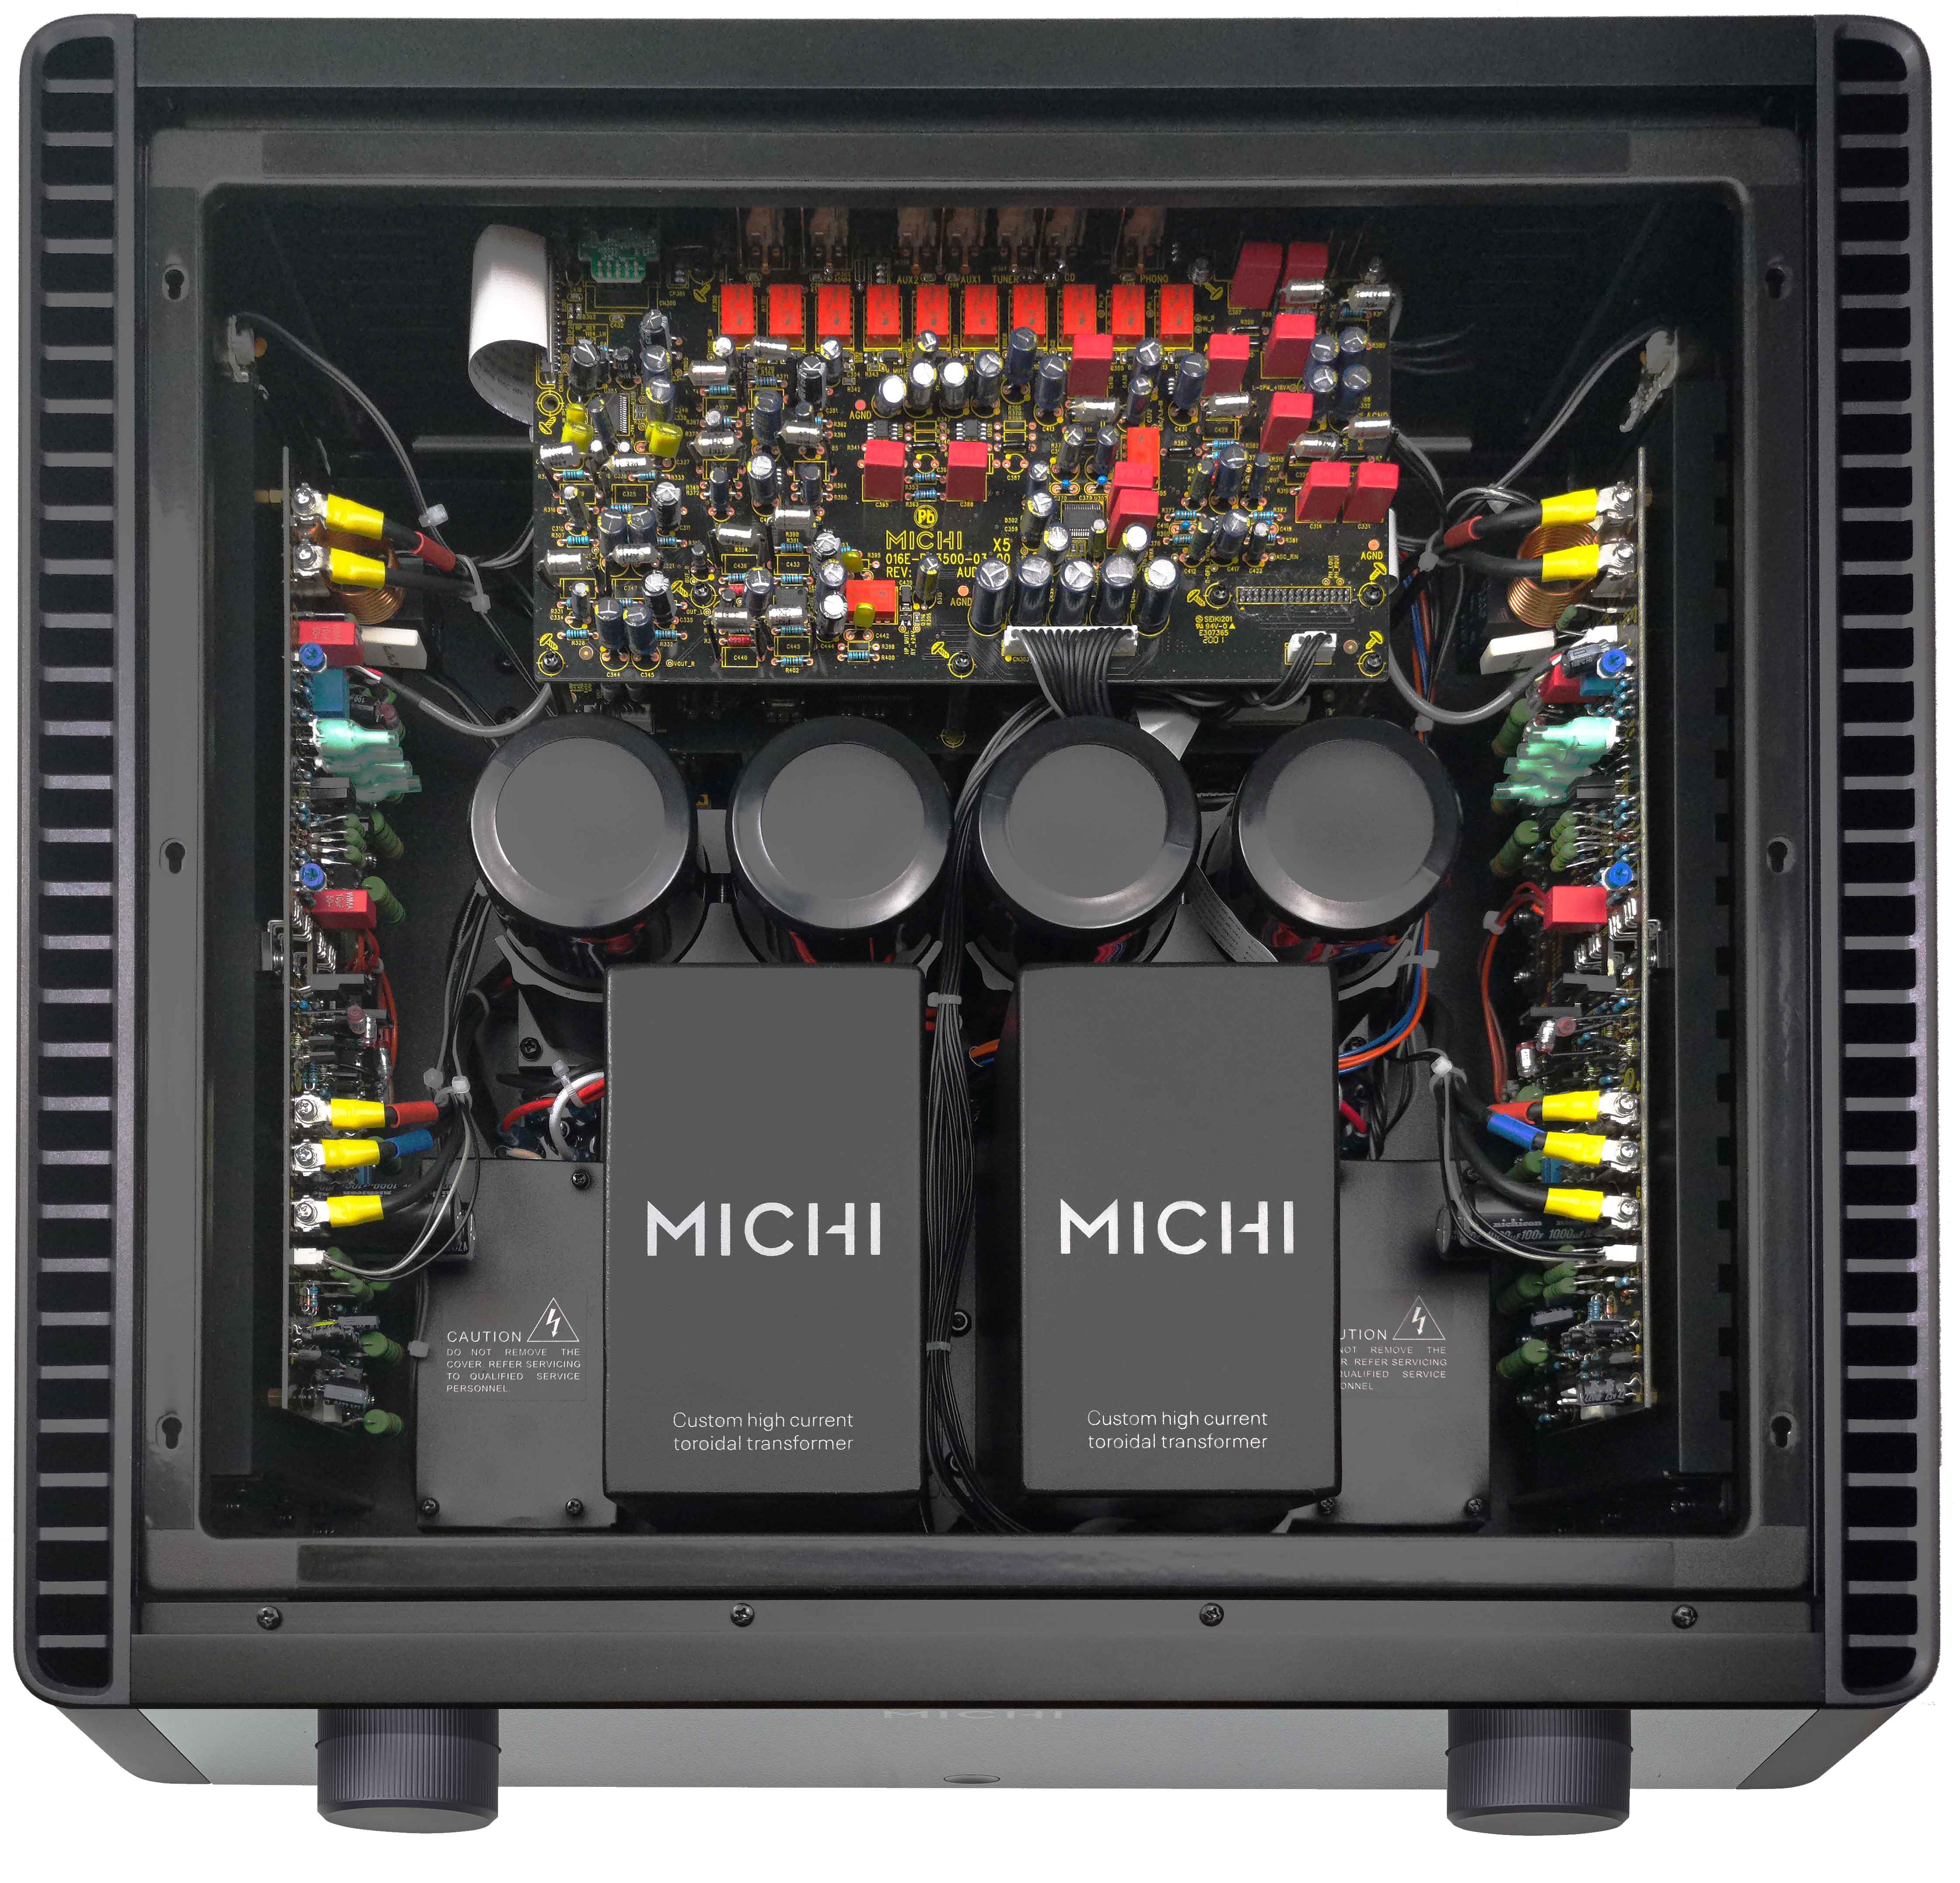 Rotel Michi X5 Series-2 Integrated Amplifier